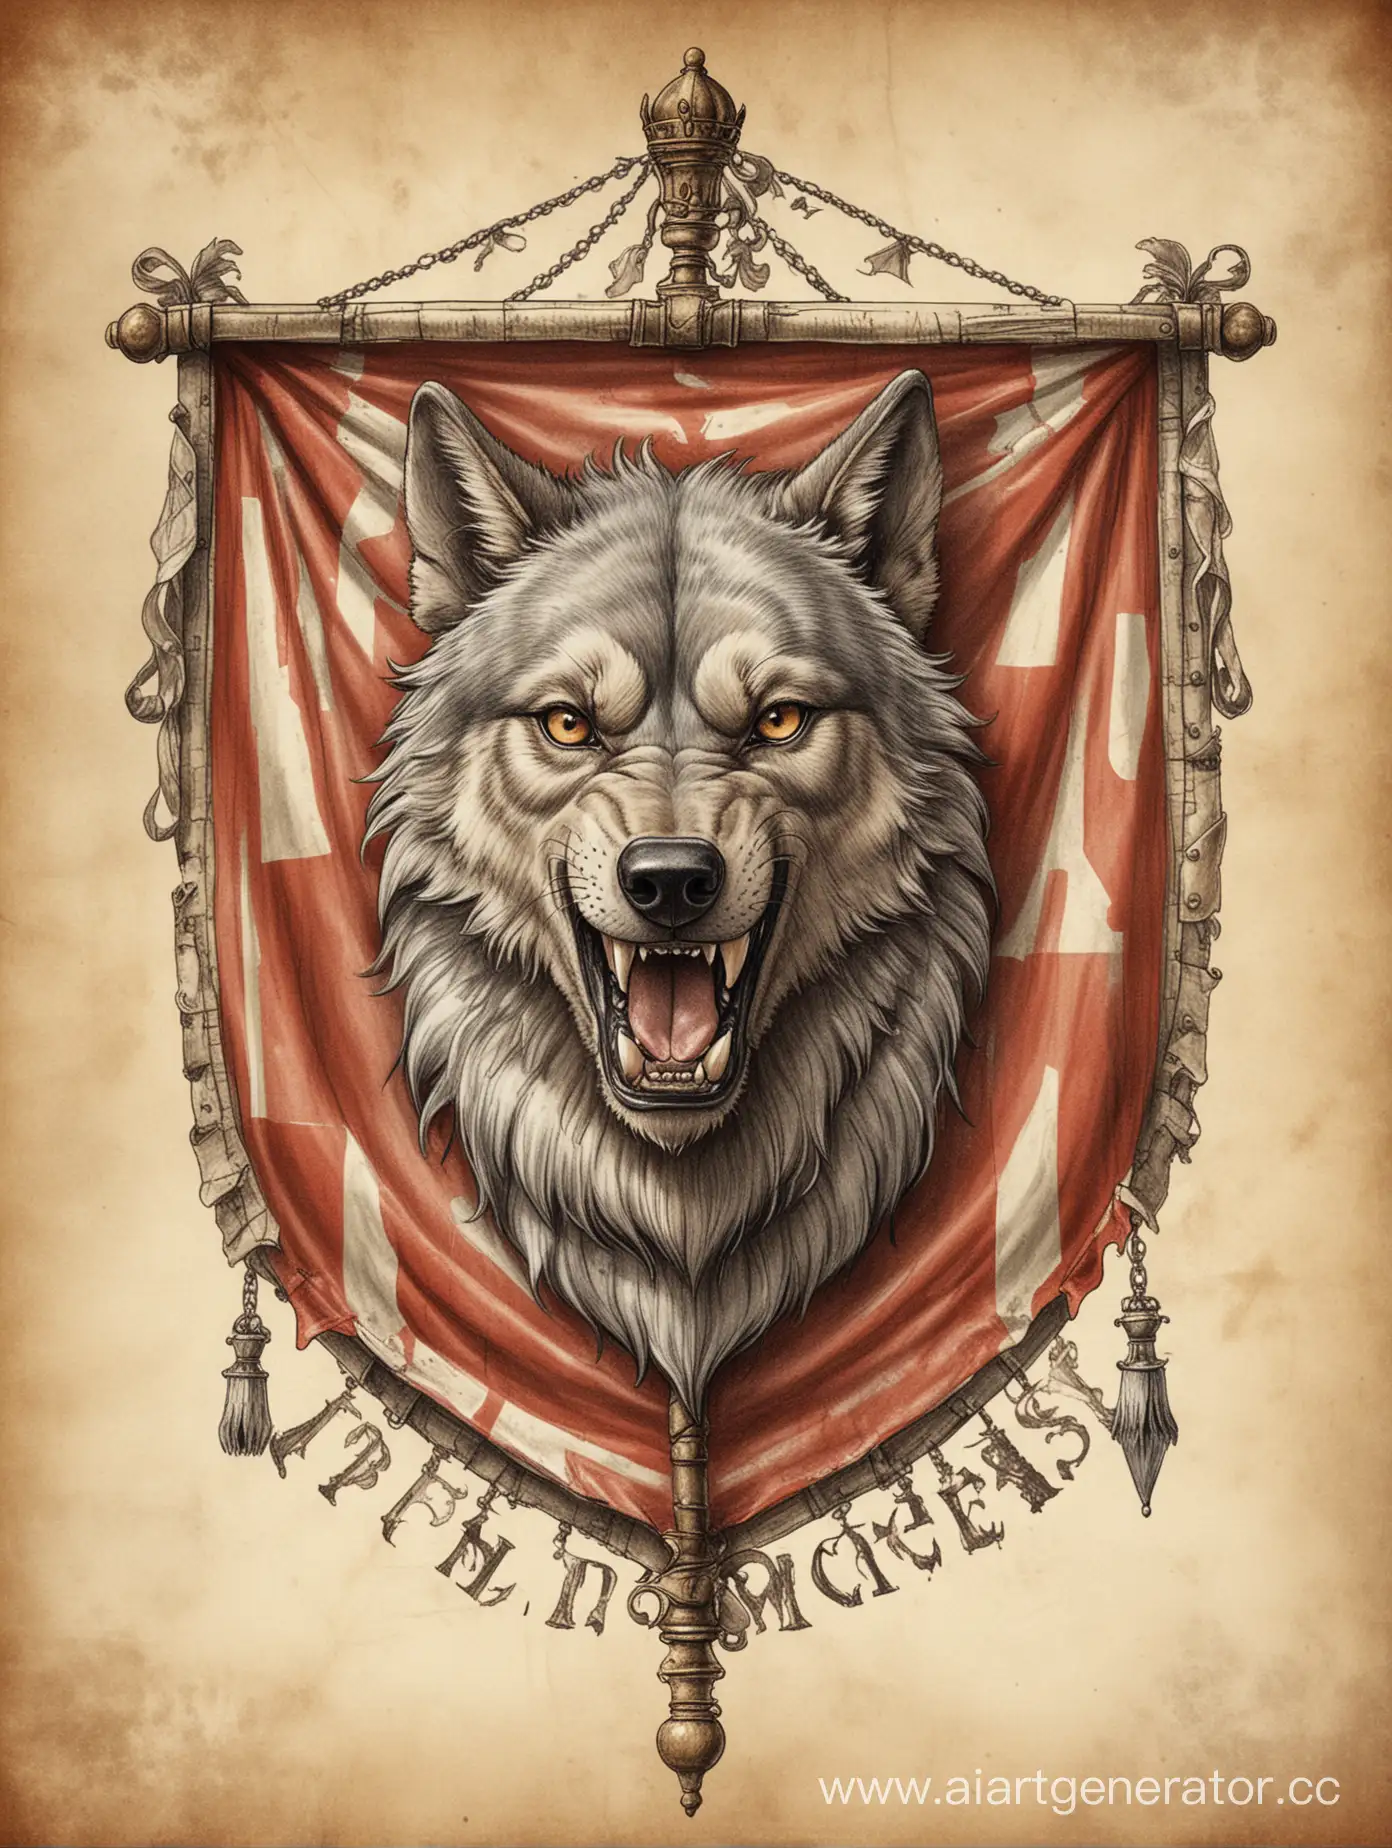 Medieval-Heraldic-Wolf-with-Ladder-and-Circus-Tent-Emblem